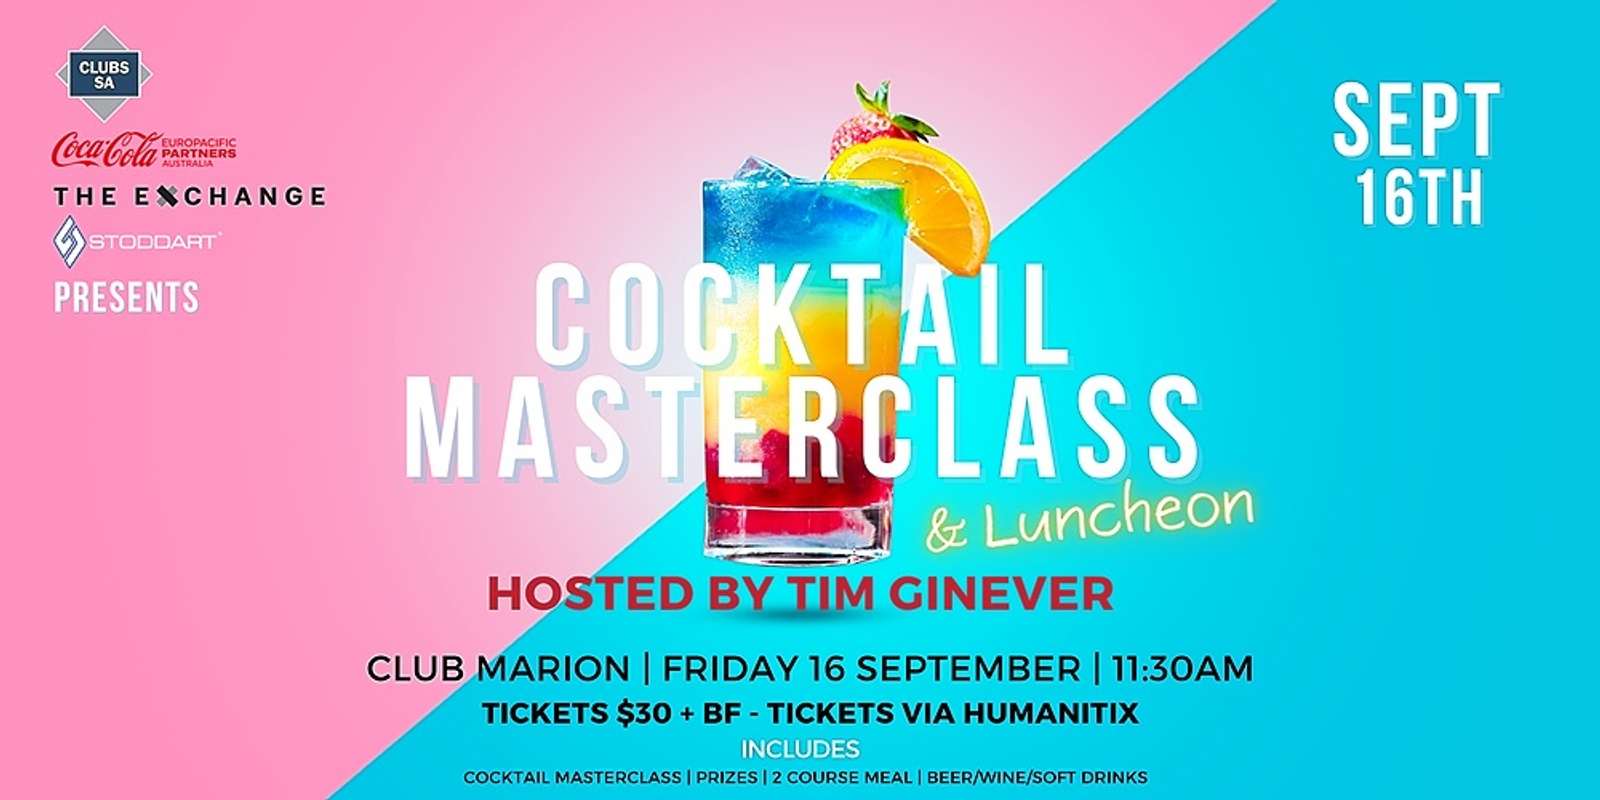 Banner image for Clubs SA Cocktail Masterclass & Luncheon